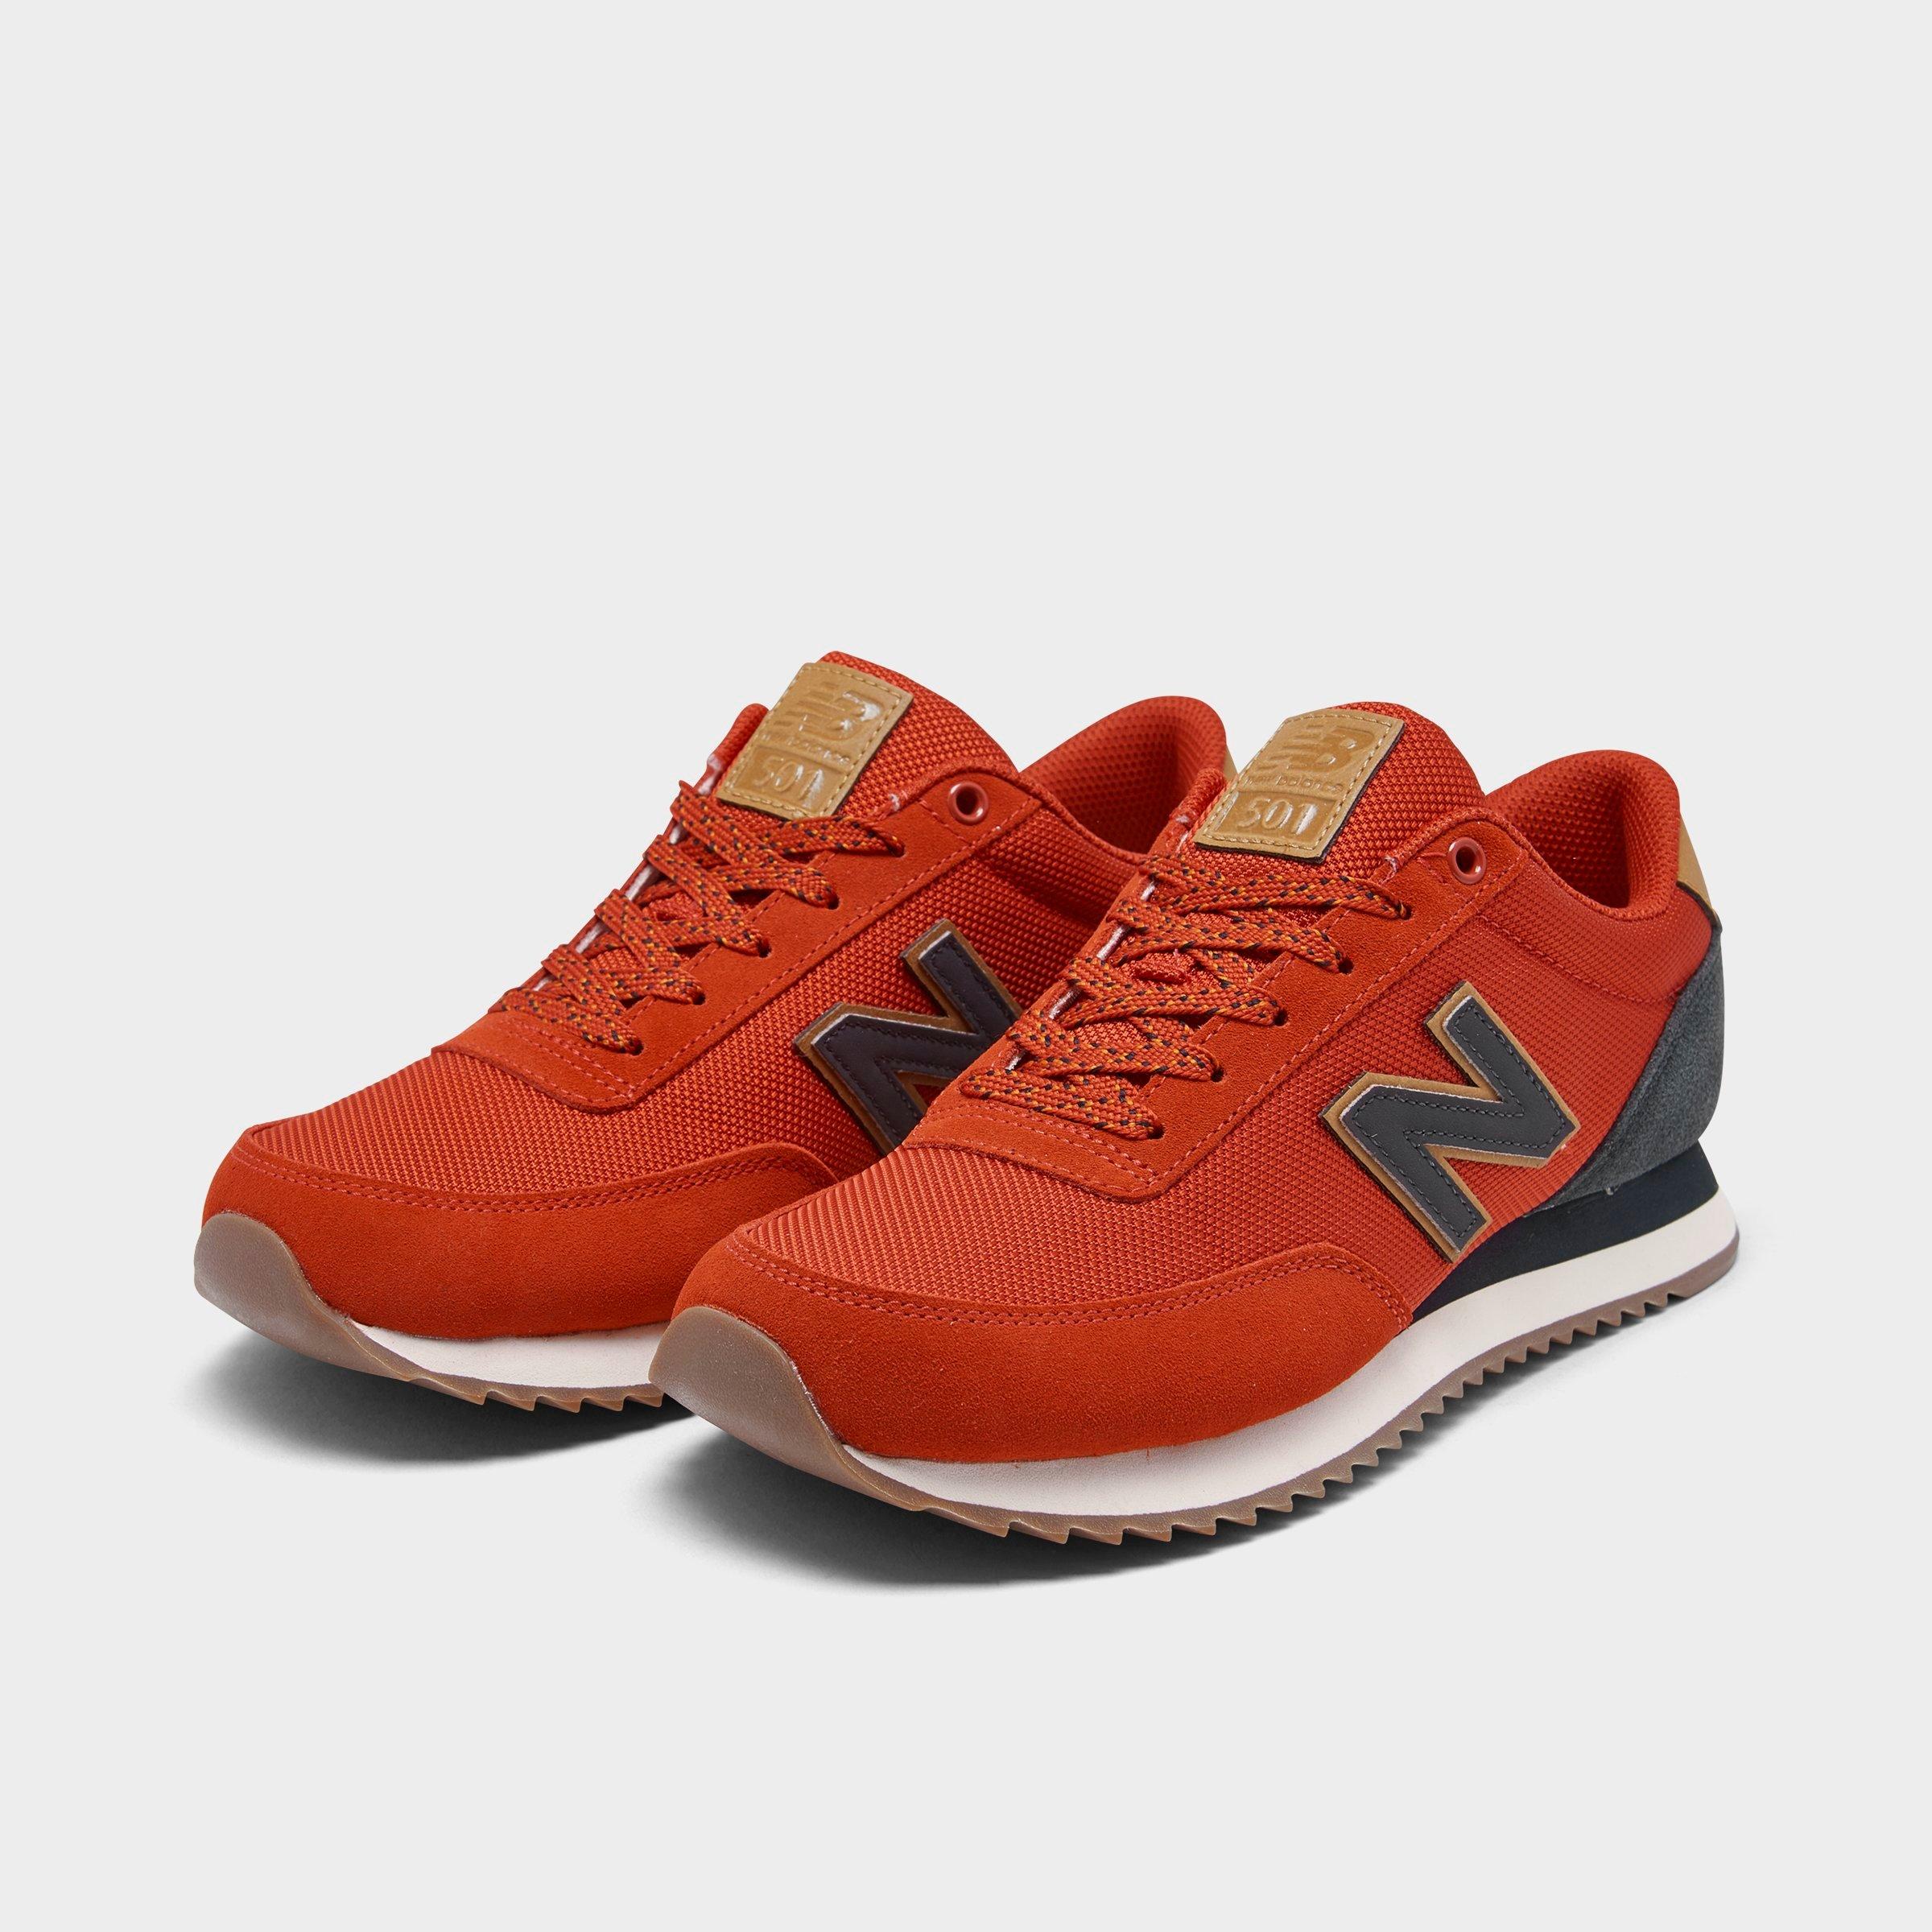 new balance 501 sneakers